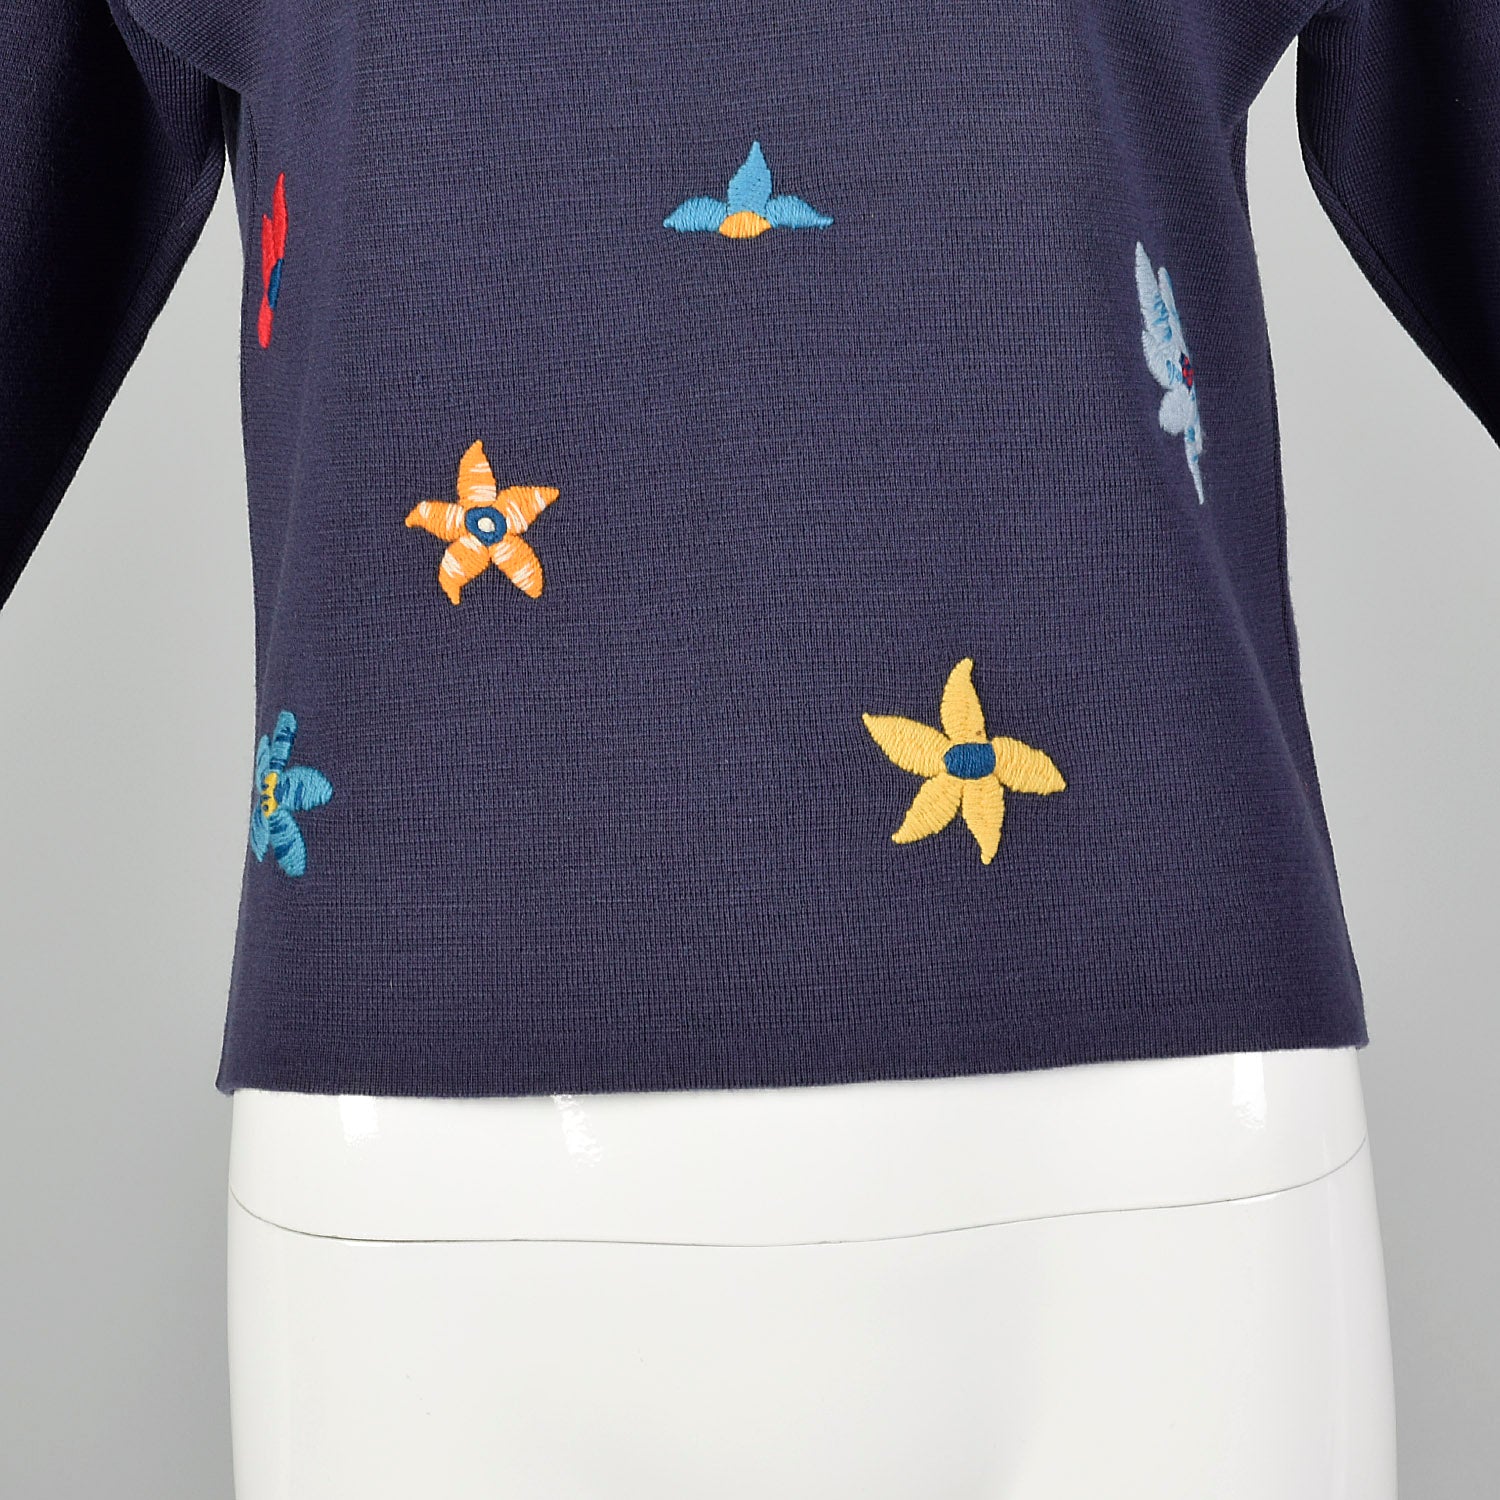 Small 1960s Navy Wool Novelty Sweater with Flower Embroidery